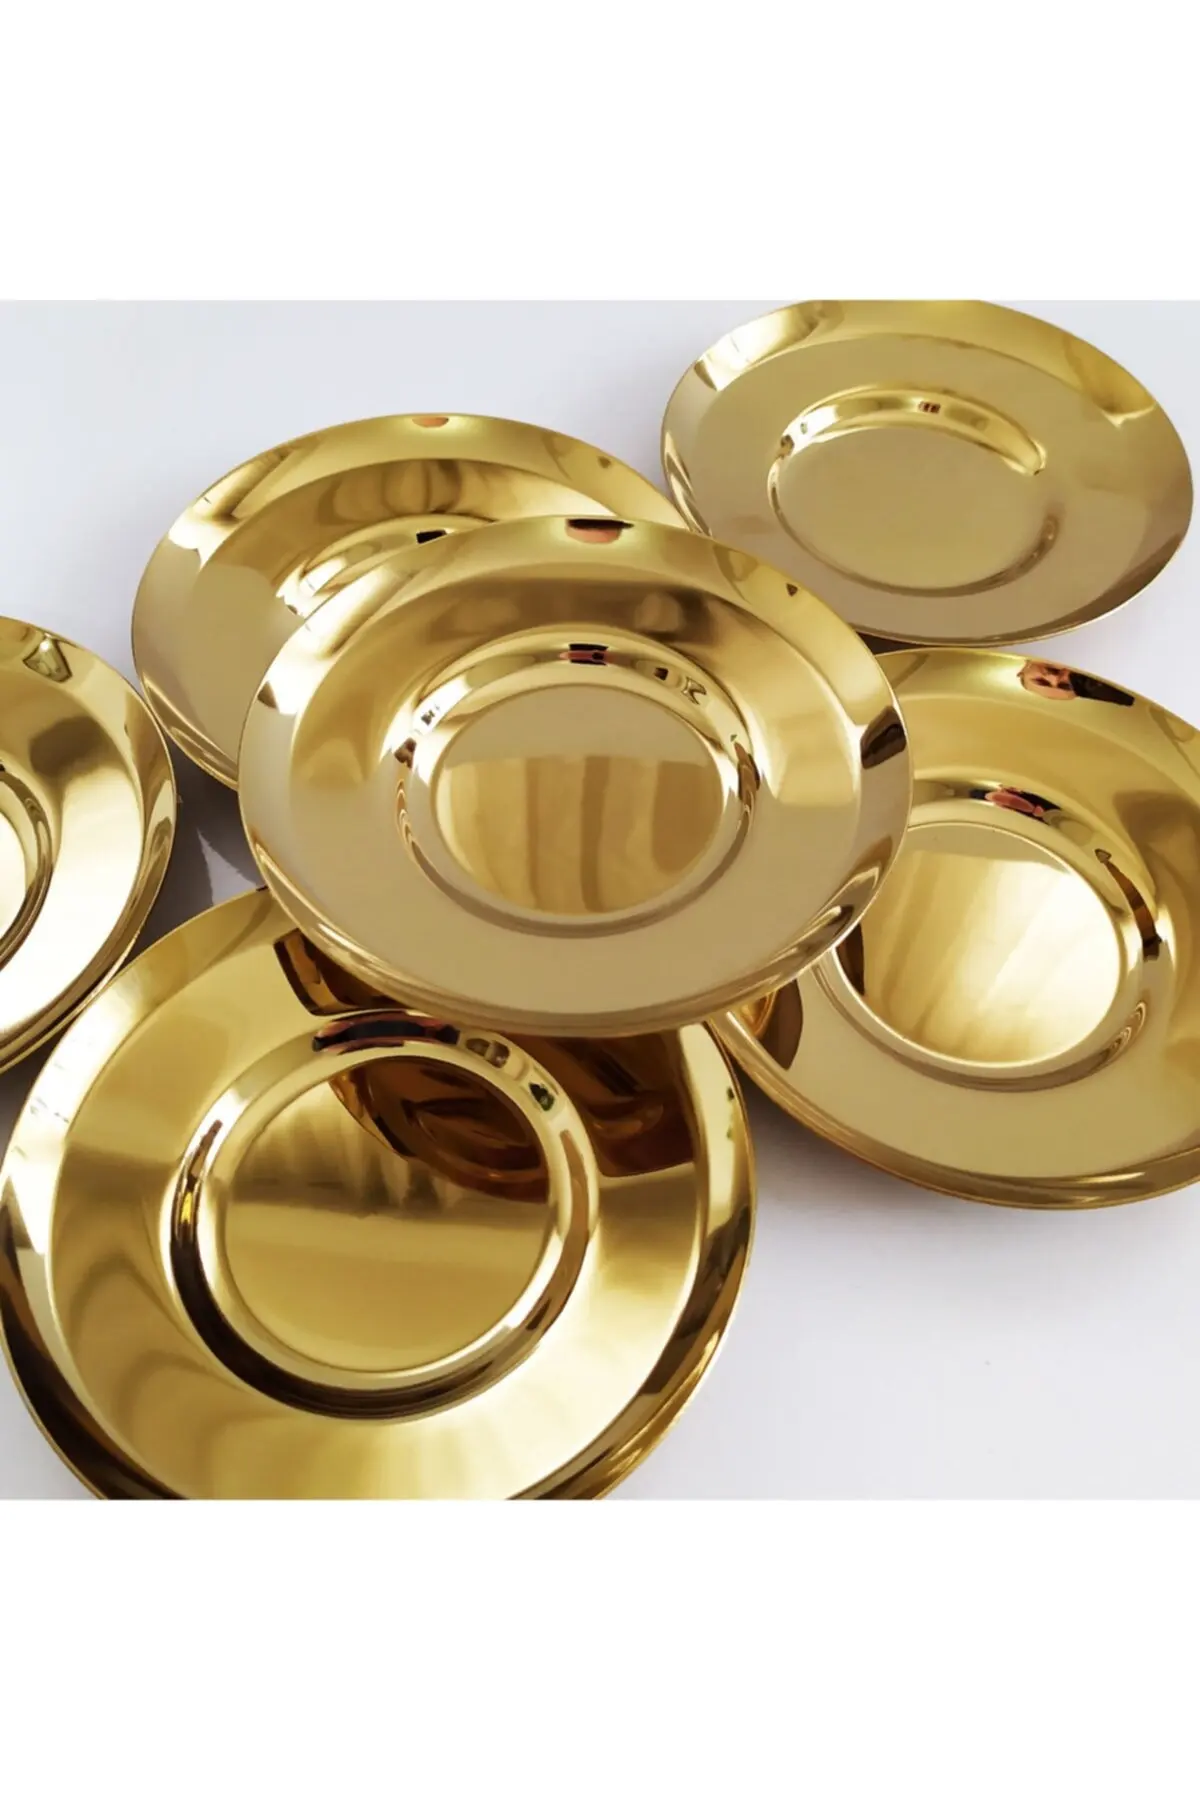 

Stainless Steel Gold Tea Plate - 6 Pieces Elegant GOLD Tea Plate 5.5x11 cm that will add value to your Tea Treats, fast shipping